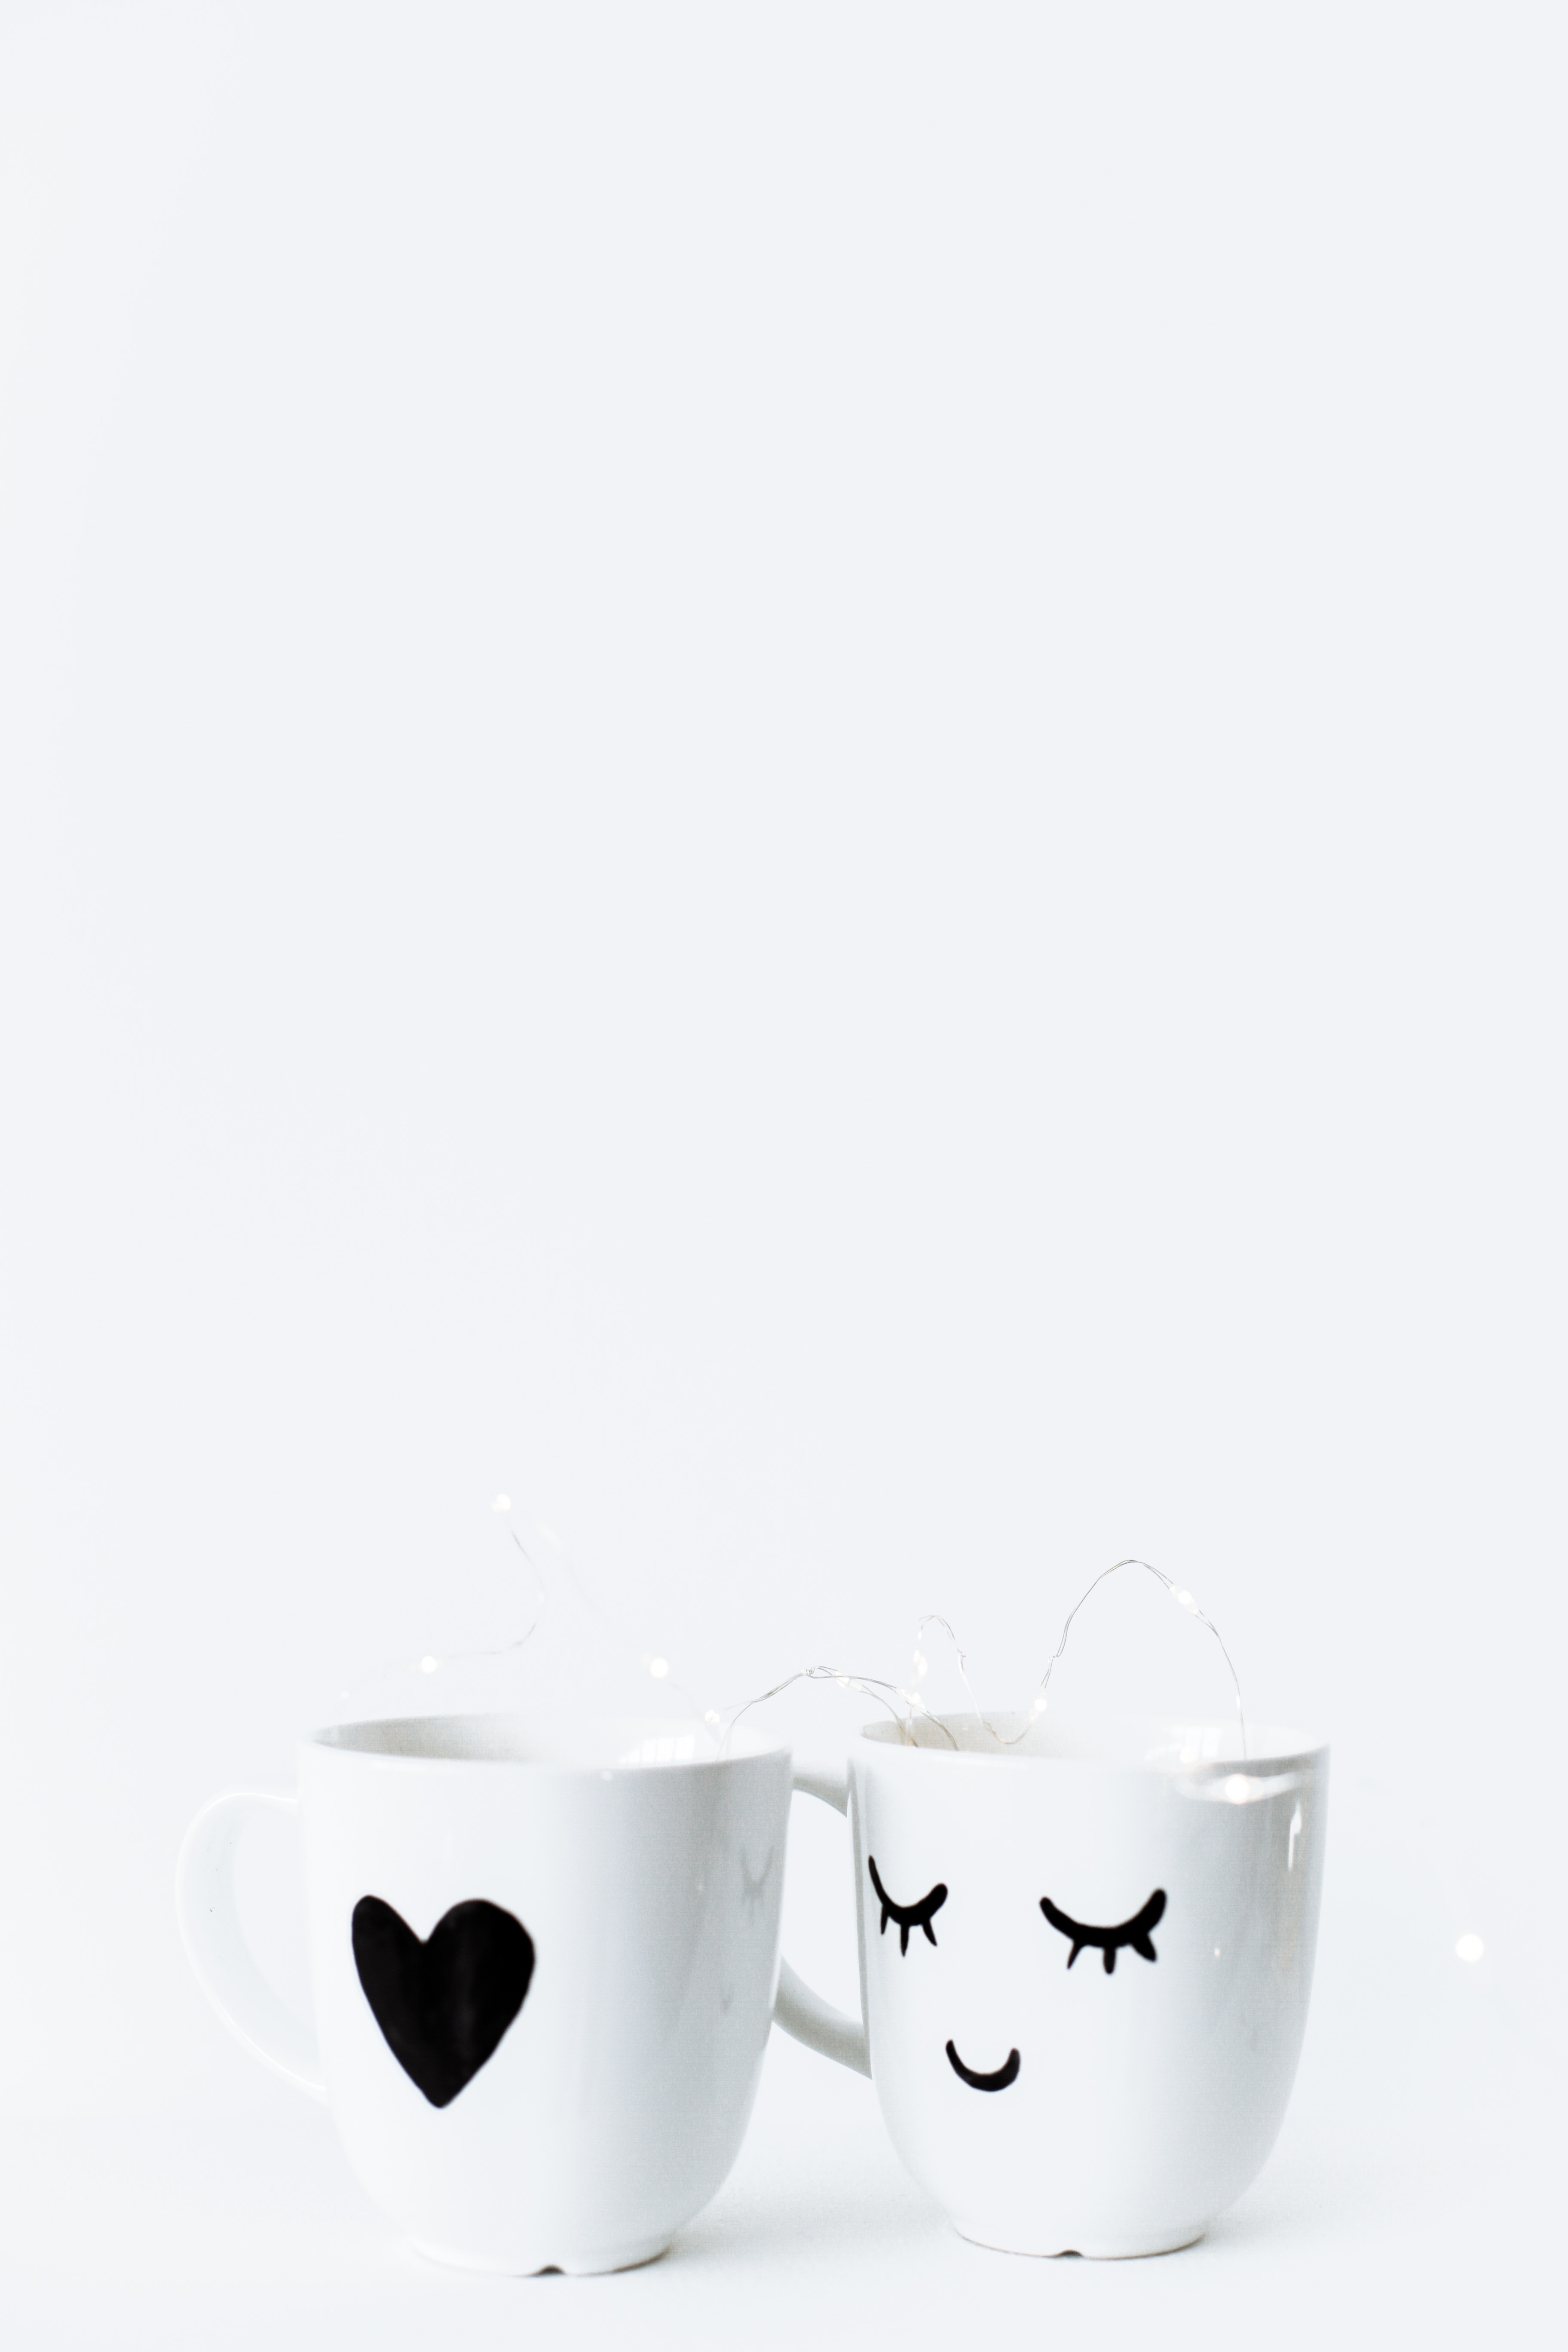 white mug with a heart white mug with a smiley face against a white background